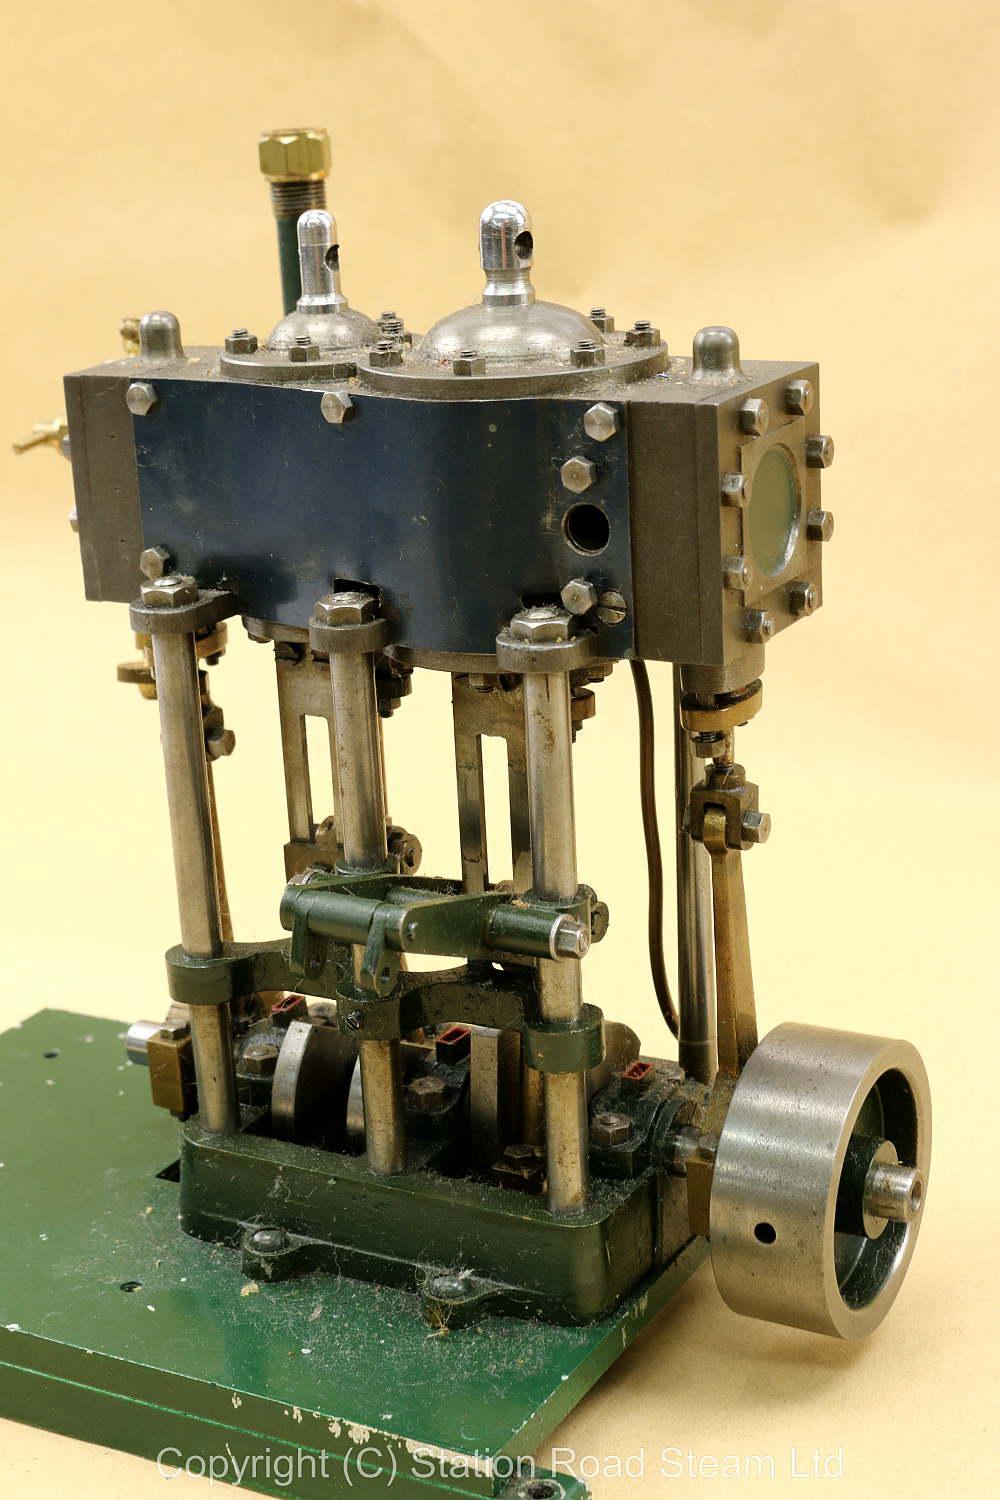 Compound twin engine with displacement lubricator